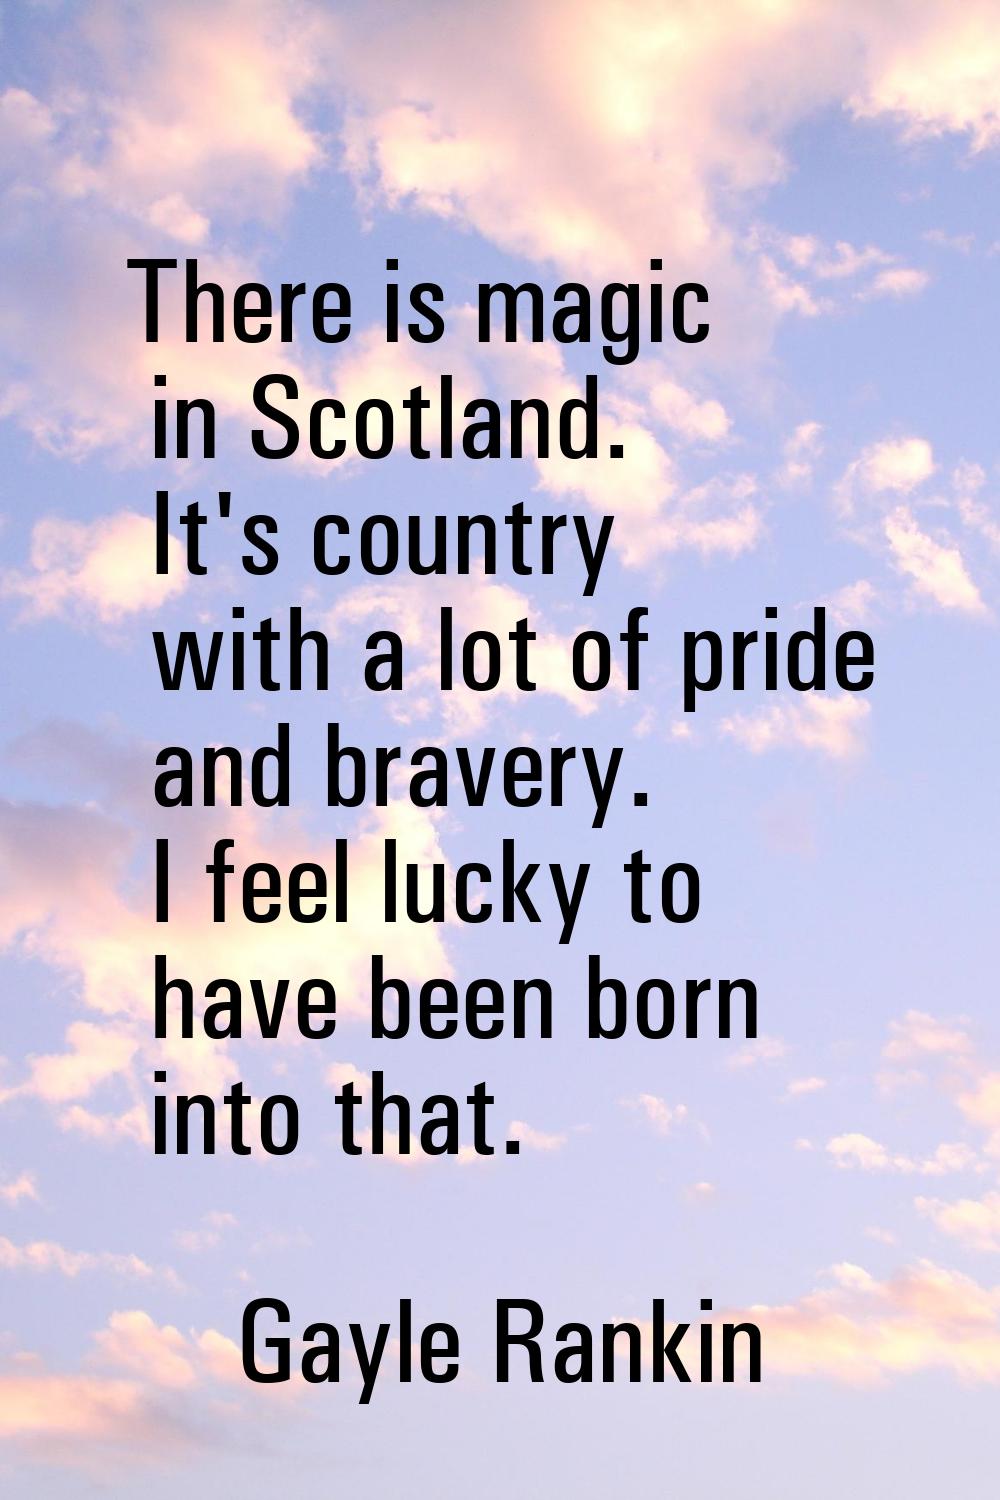 There is magic in Scotland. It's country with a lot of pride and bravery. I feel lucky to have been